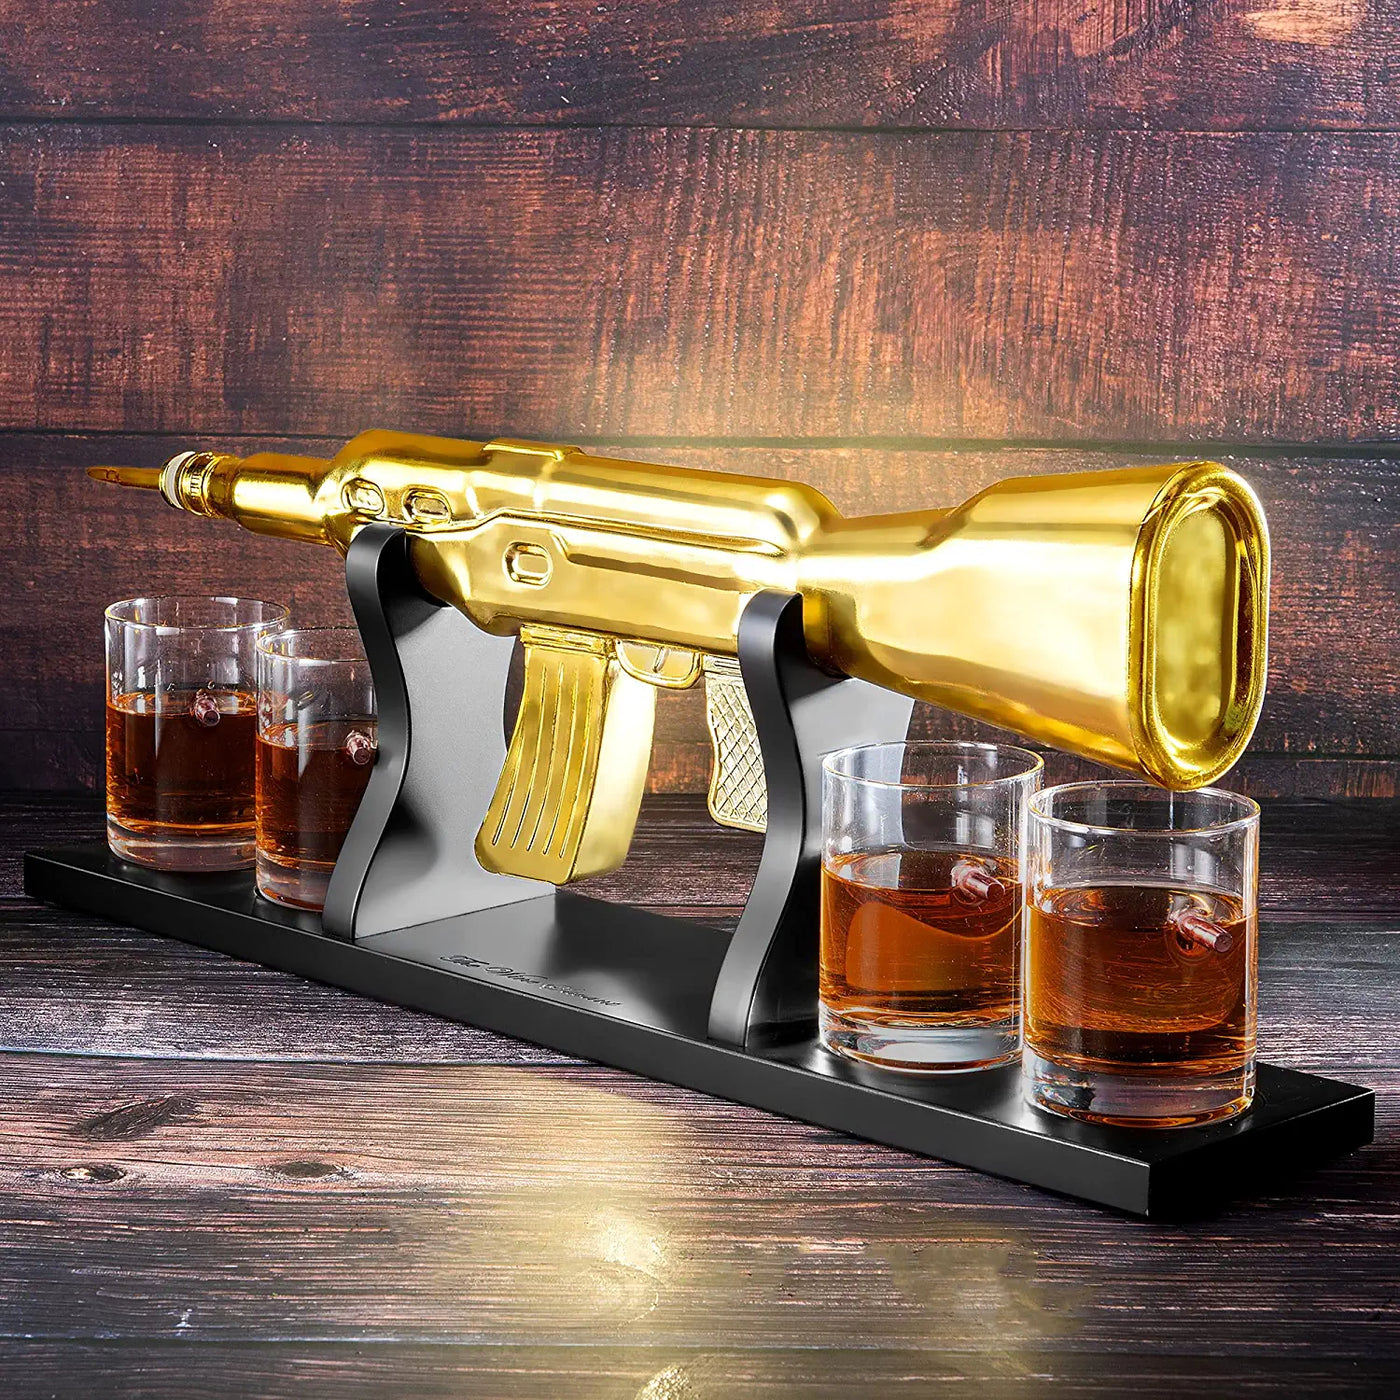 AK Gold Whiskey Decanter Set With 4 Bullet Whiskey Glasses - Liquor Lux, Gift For Fathers, Uncles, Sons - Veteran Gifts, Military Gift, Home Bar Gift, Father's Day